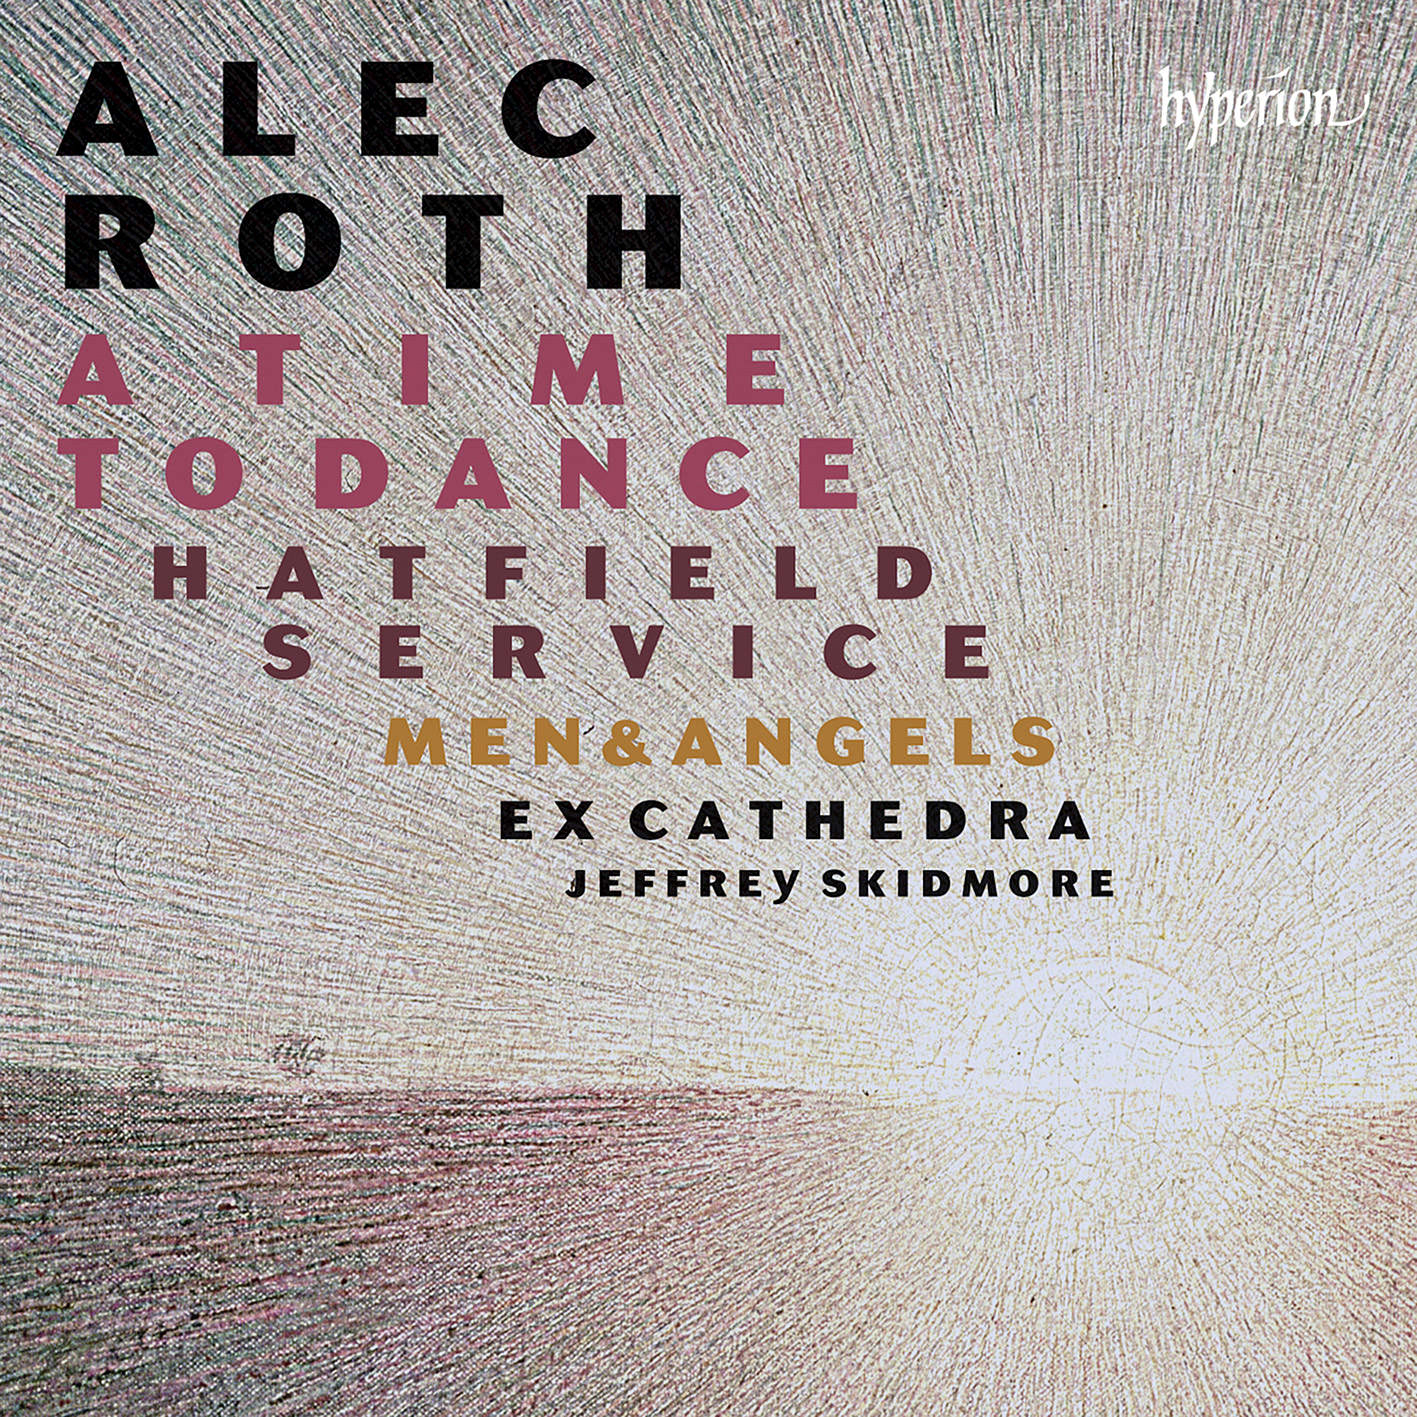 Ex Cathedra, Jeffrey Skidmore - Roth: A Time to Dance & Other choral works (2016) [Official Digital Download 24bit/44,1kHz] Download